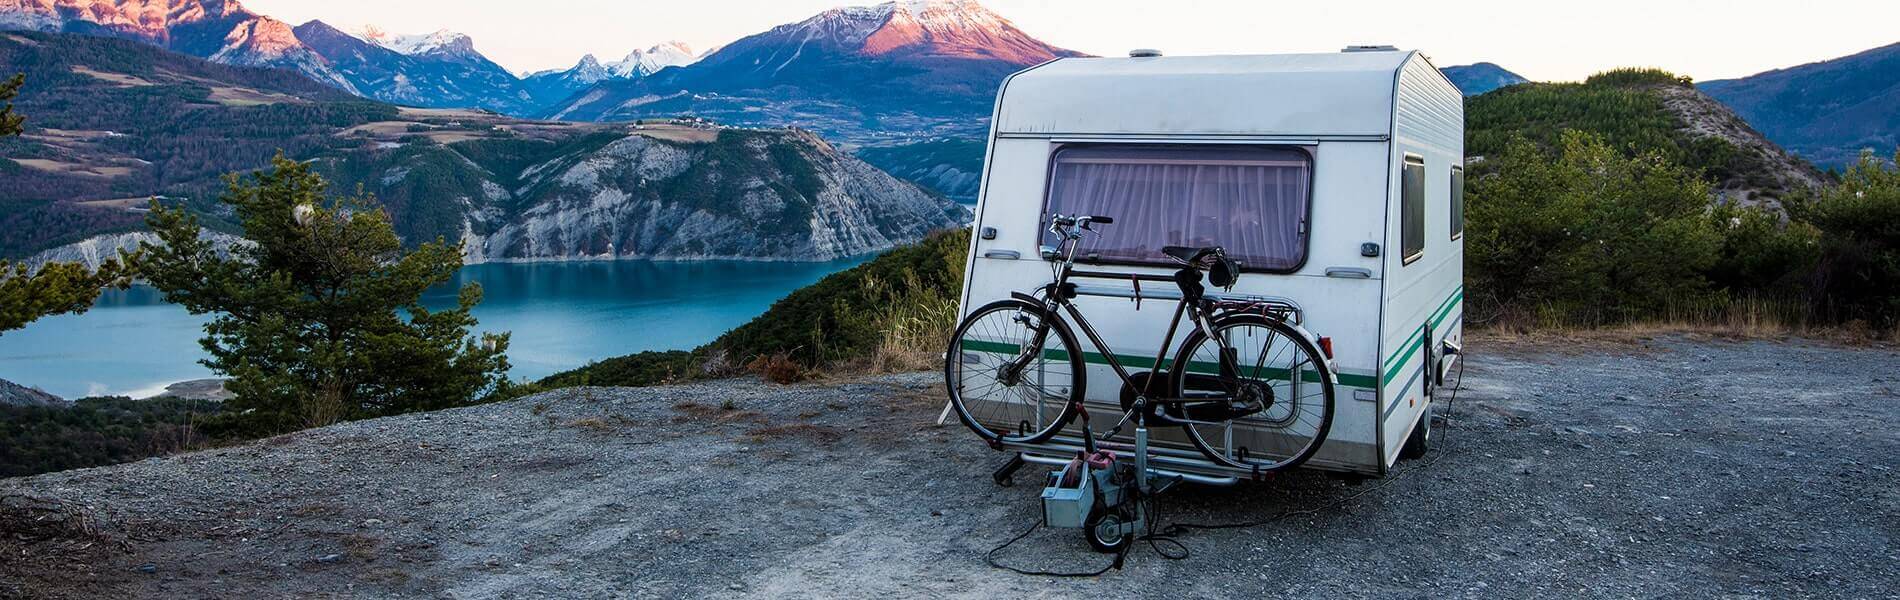 image of camper by water and mountains